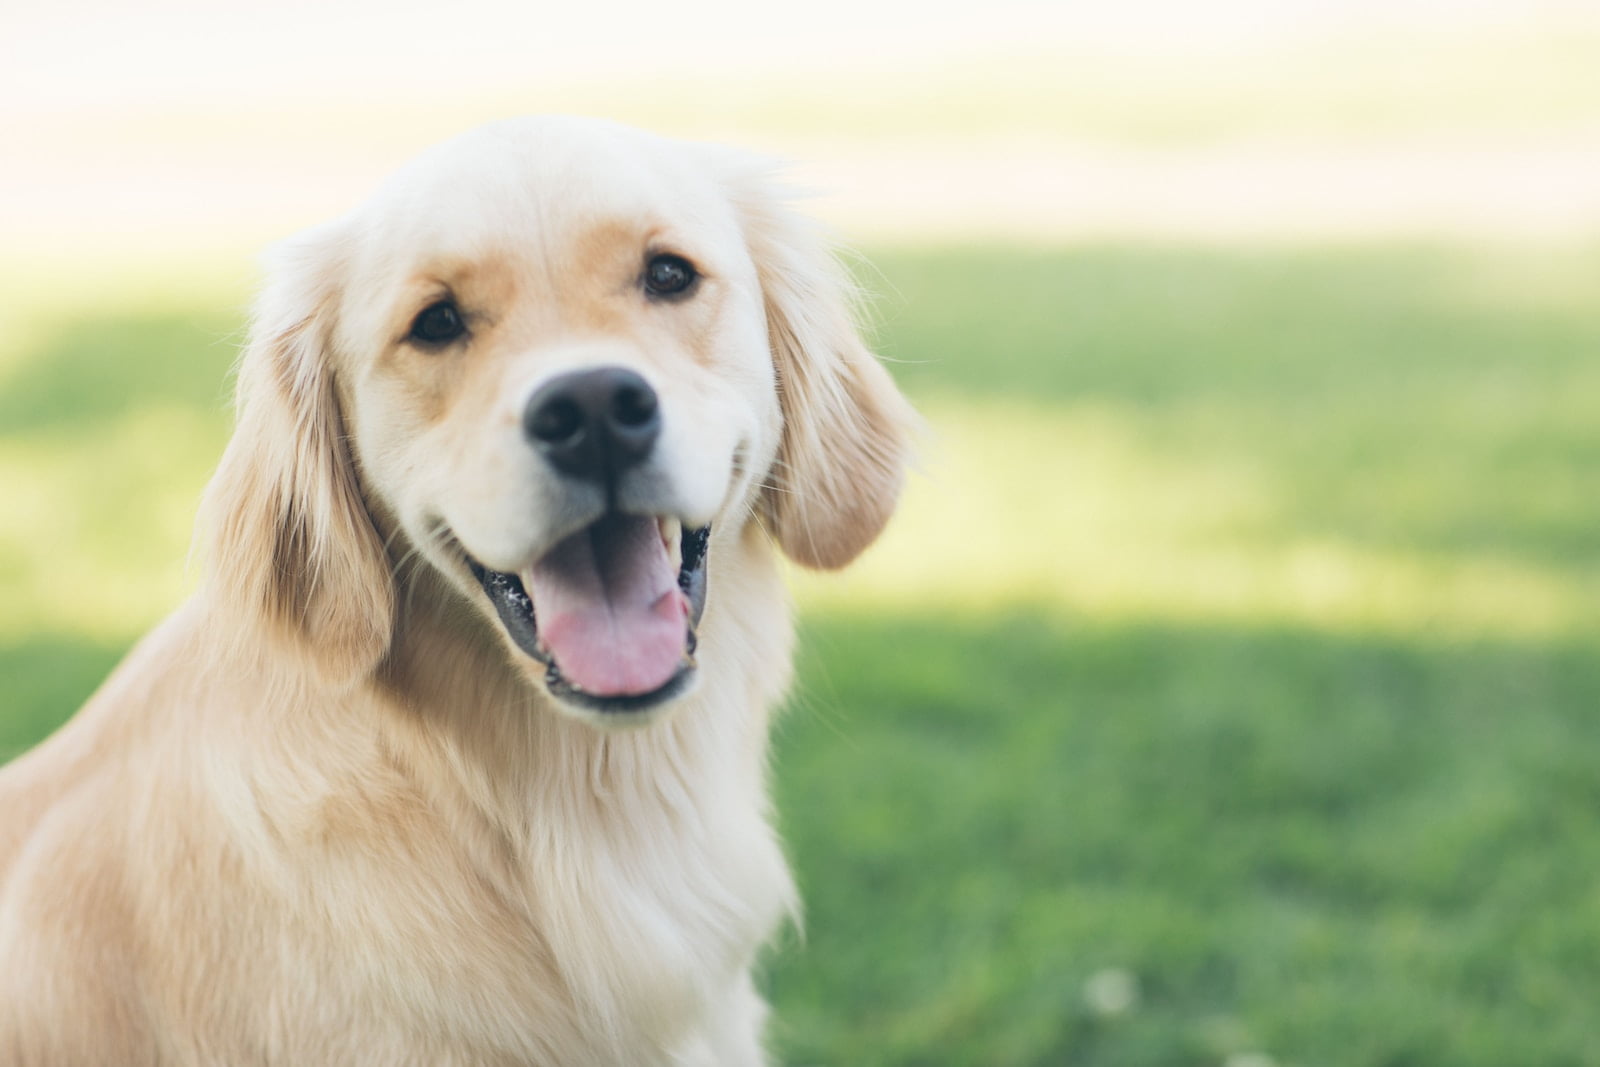 5 Selected Dog Breeds That Are Considered to be Friendly - The gentle nature of these dogs makes them ``healthy and adorable'' and ``soothing.''